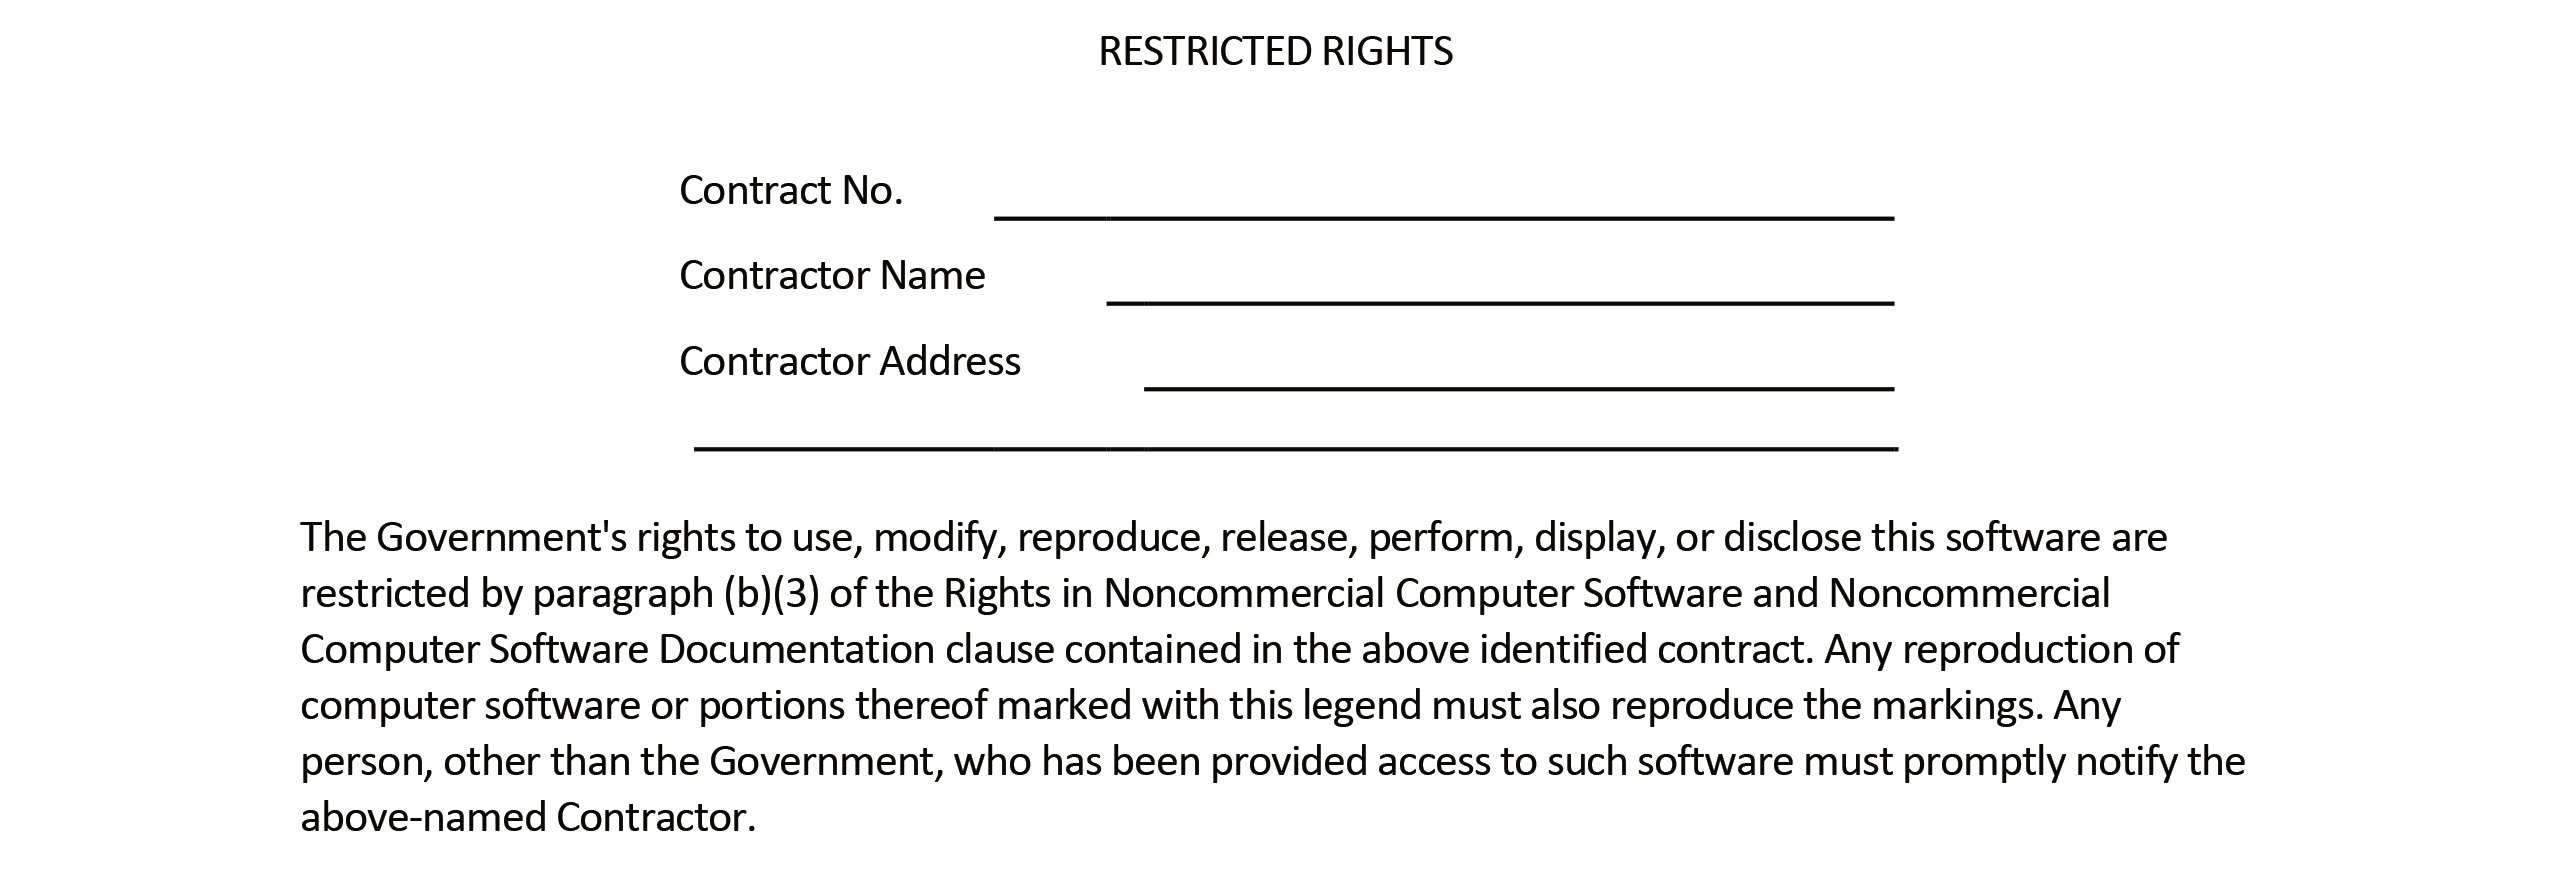 #6E - Restricted Rights2